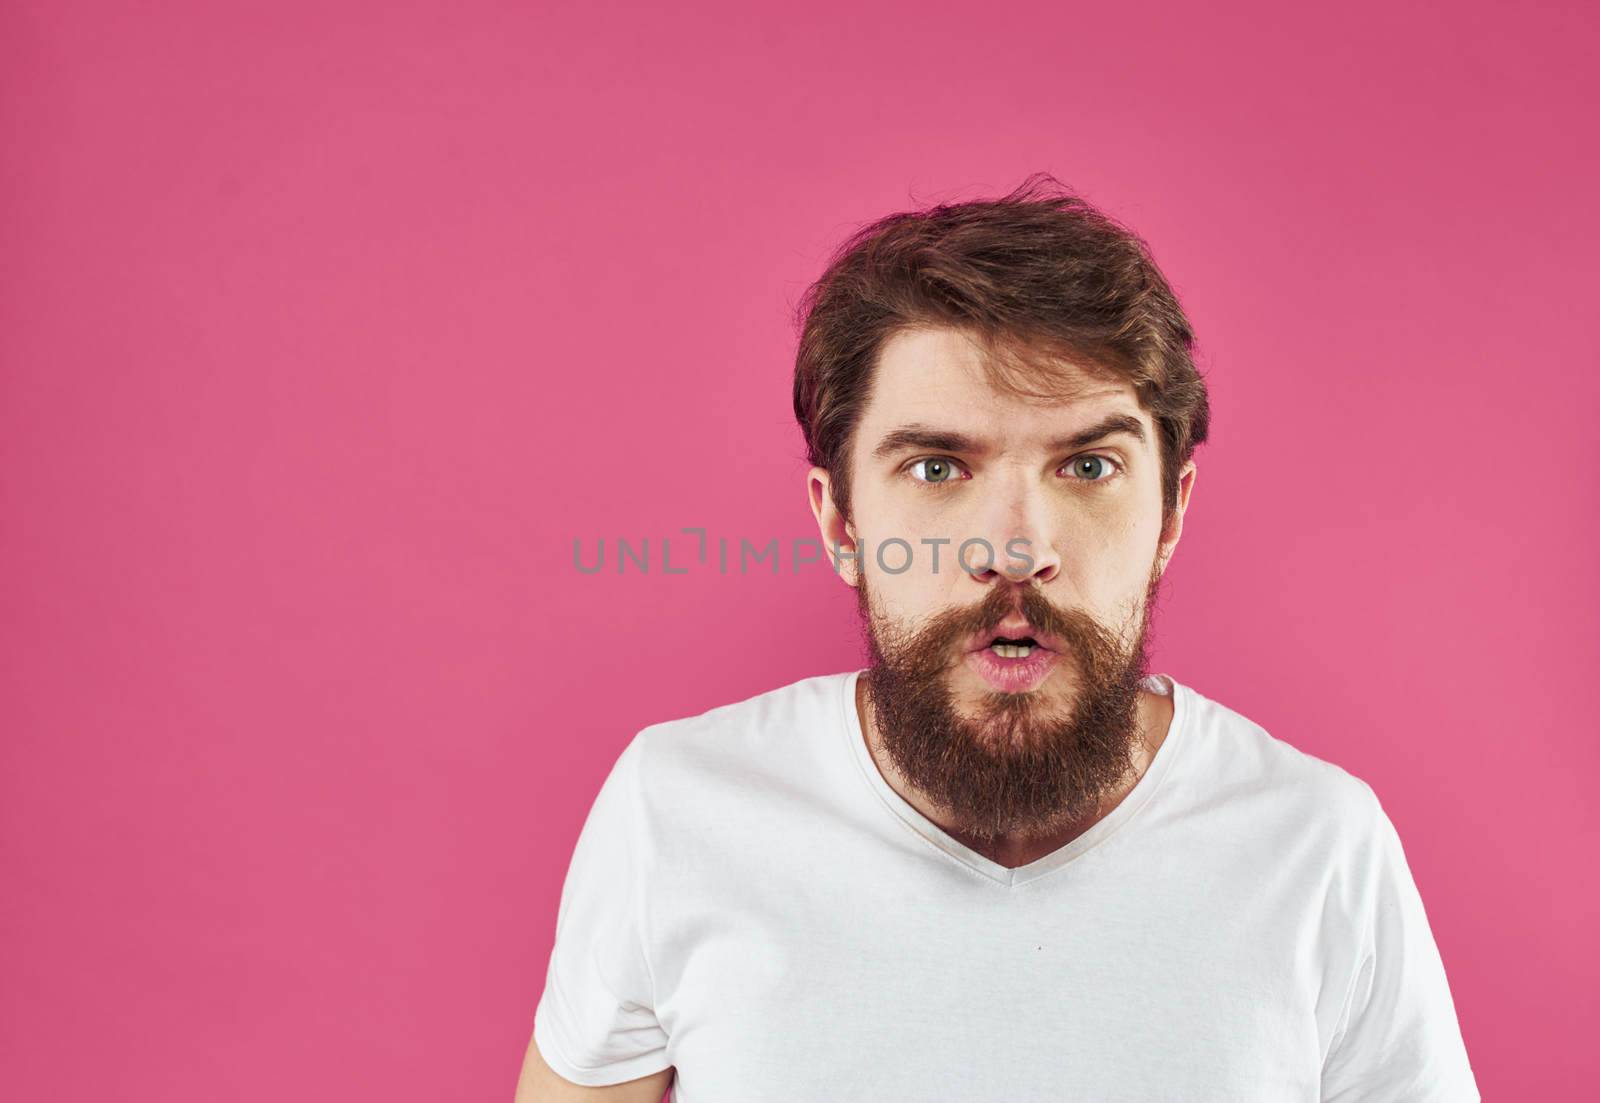 Emotional man gesturing with his hands on a pink background Copy Space by SHOTPRIME